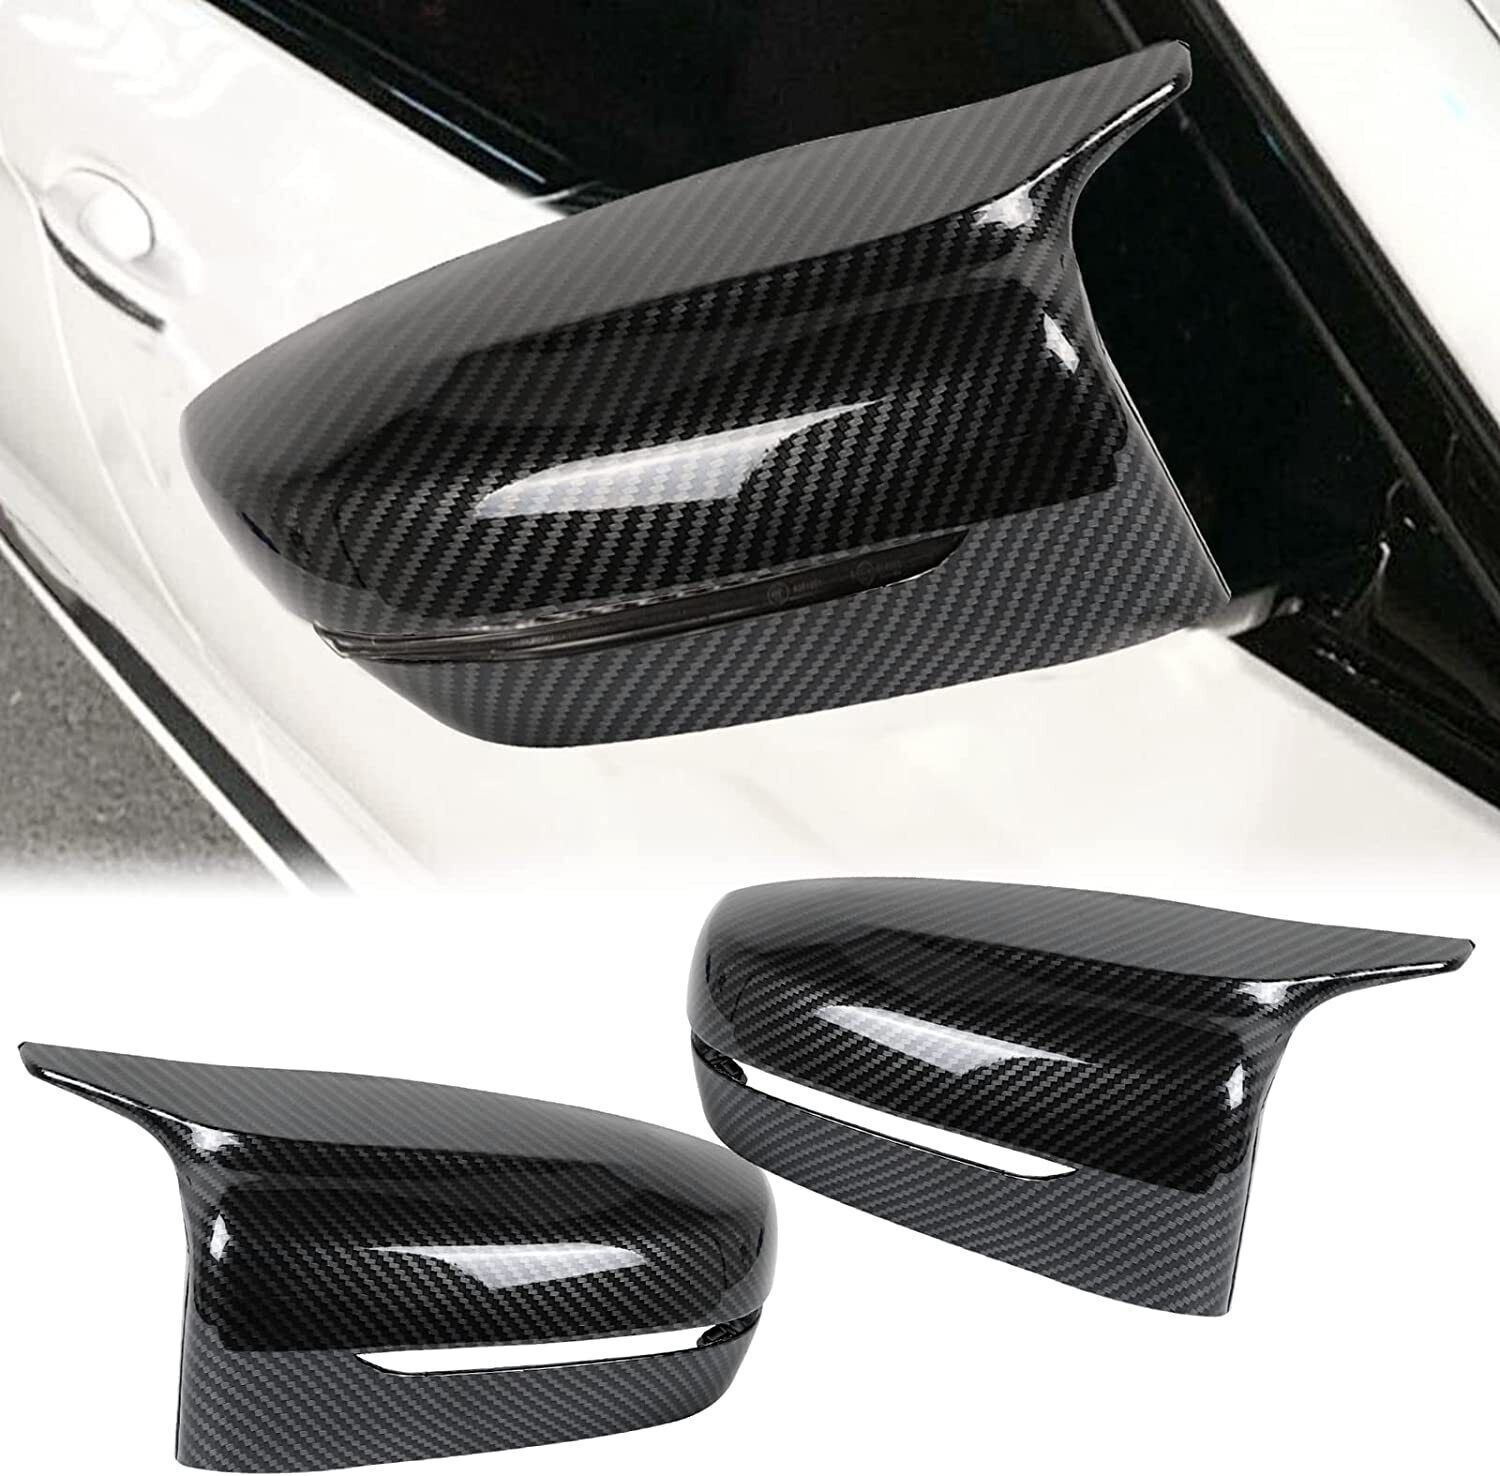 CARBON FIBER FOR 17-22 BMW G30 G20 G11 G12 M STYLE Clip-ON SIDE MIRROR COVER CAP